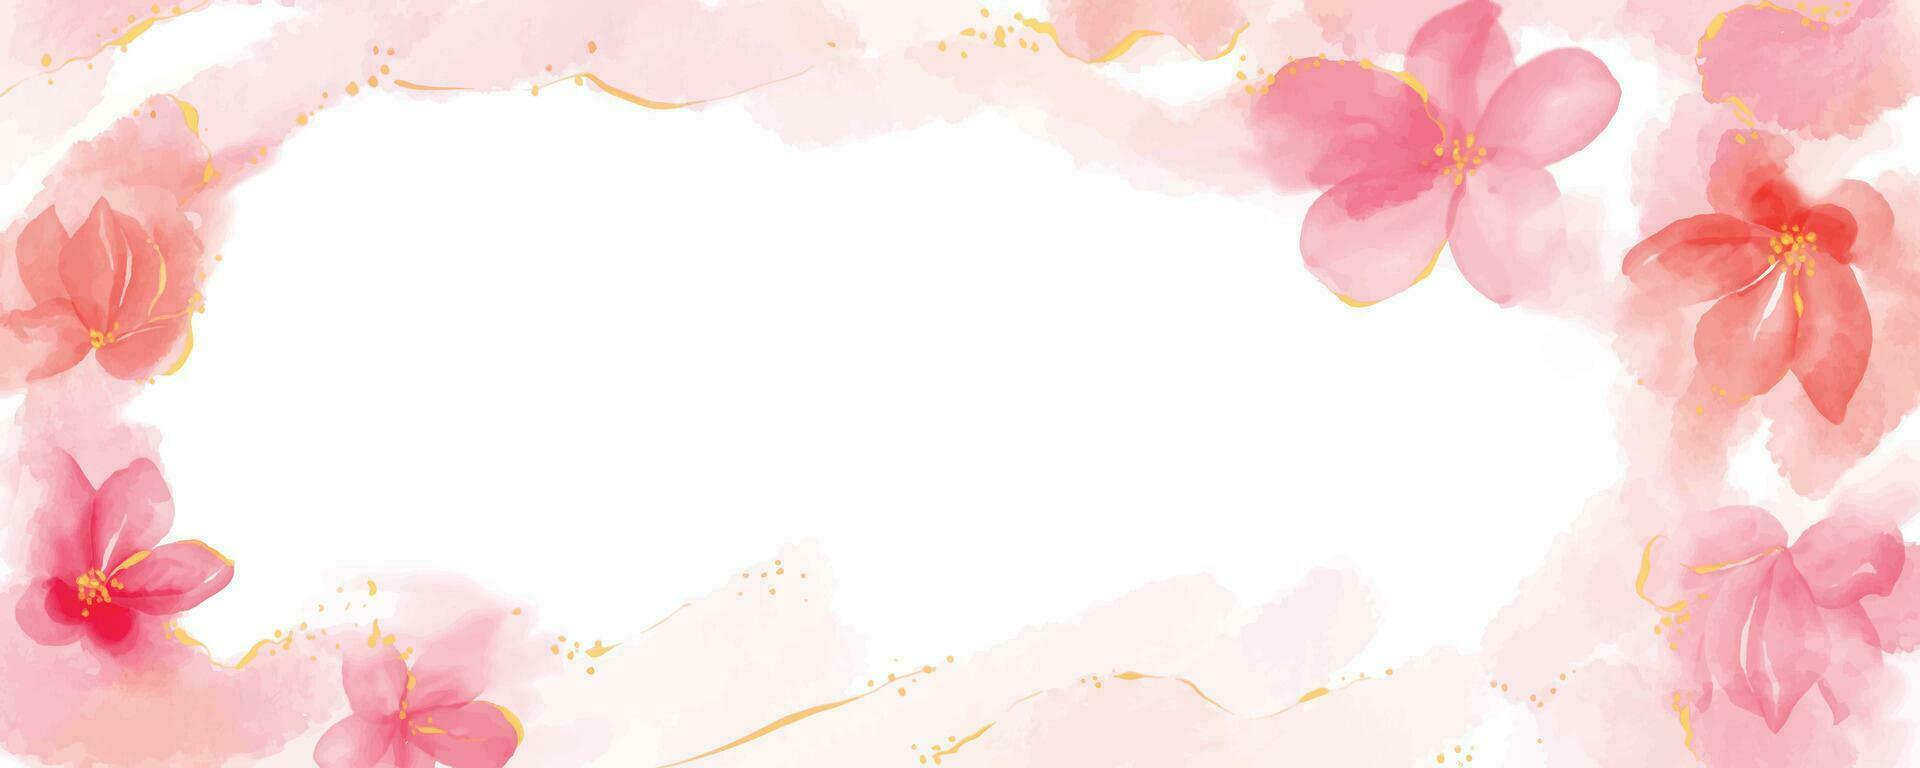 abstract pink gold flower splash watercolor background vector